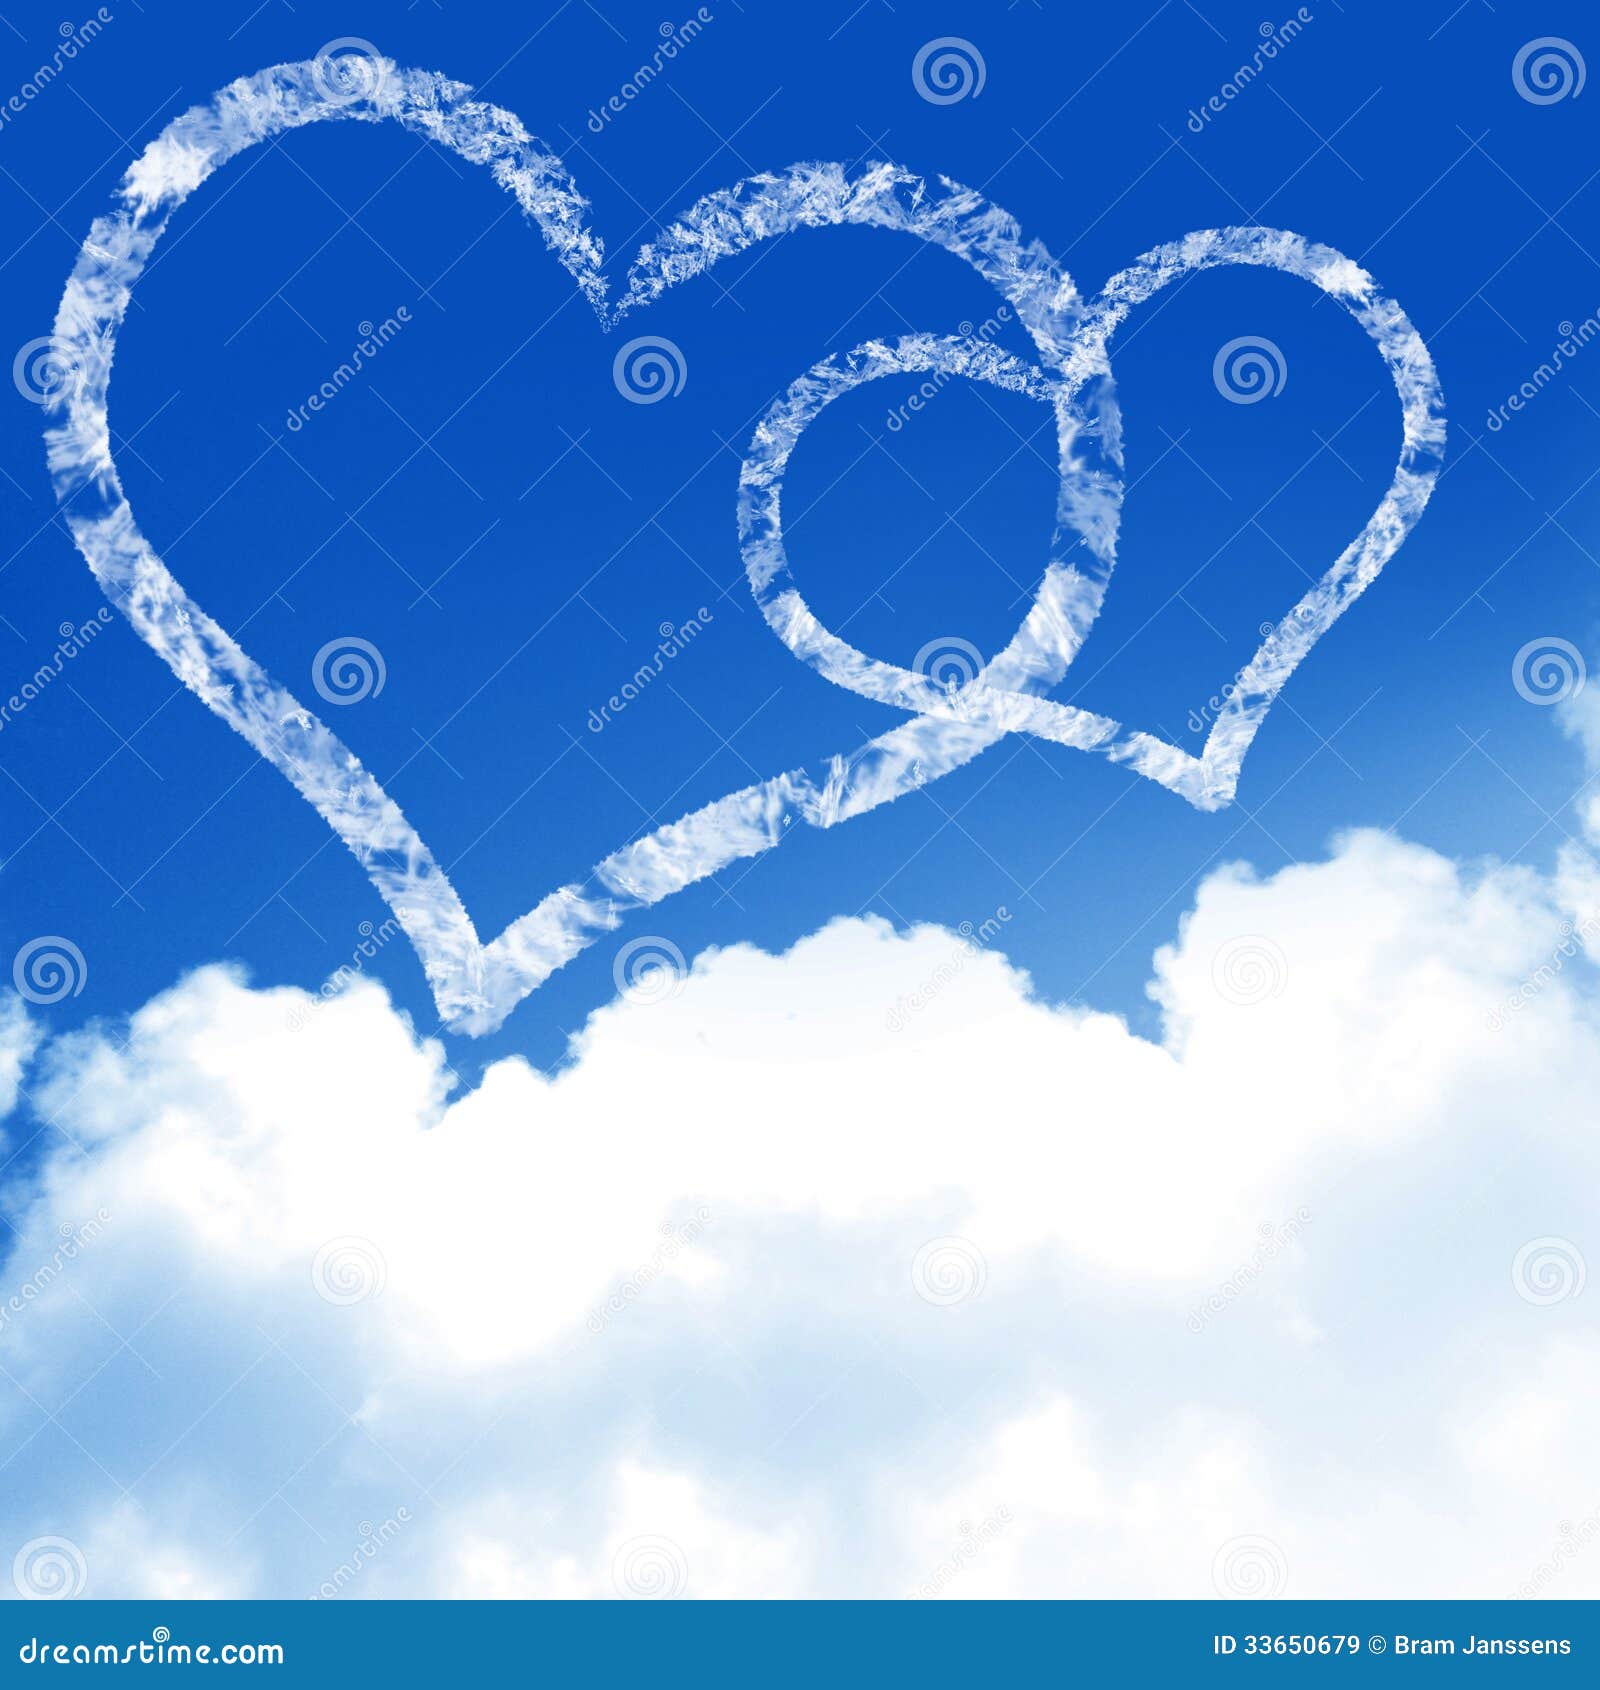 Love is in the air stock illustration. Illustration of shape - 33650679